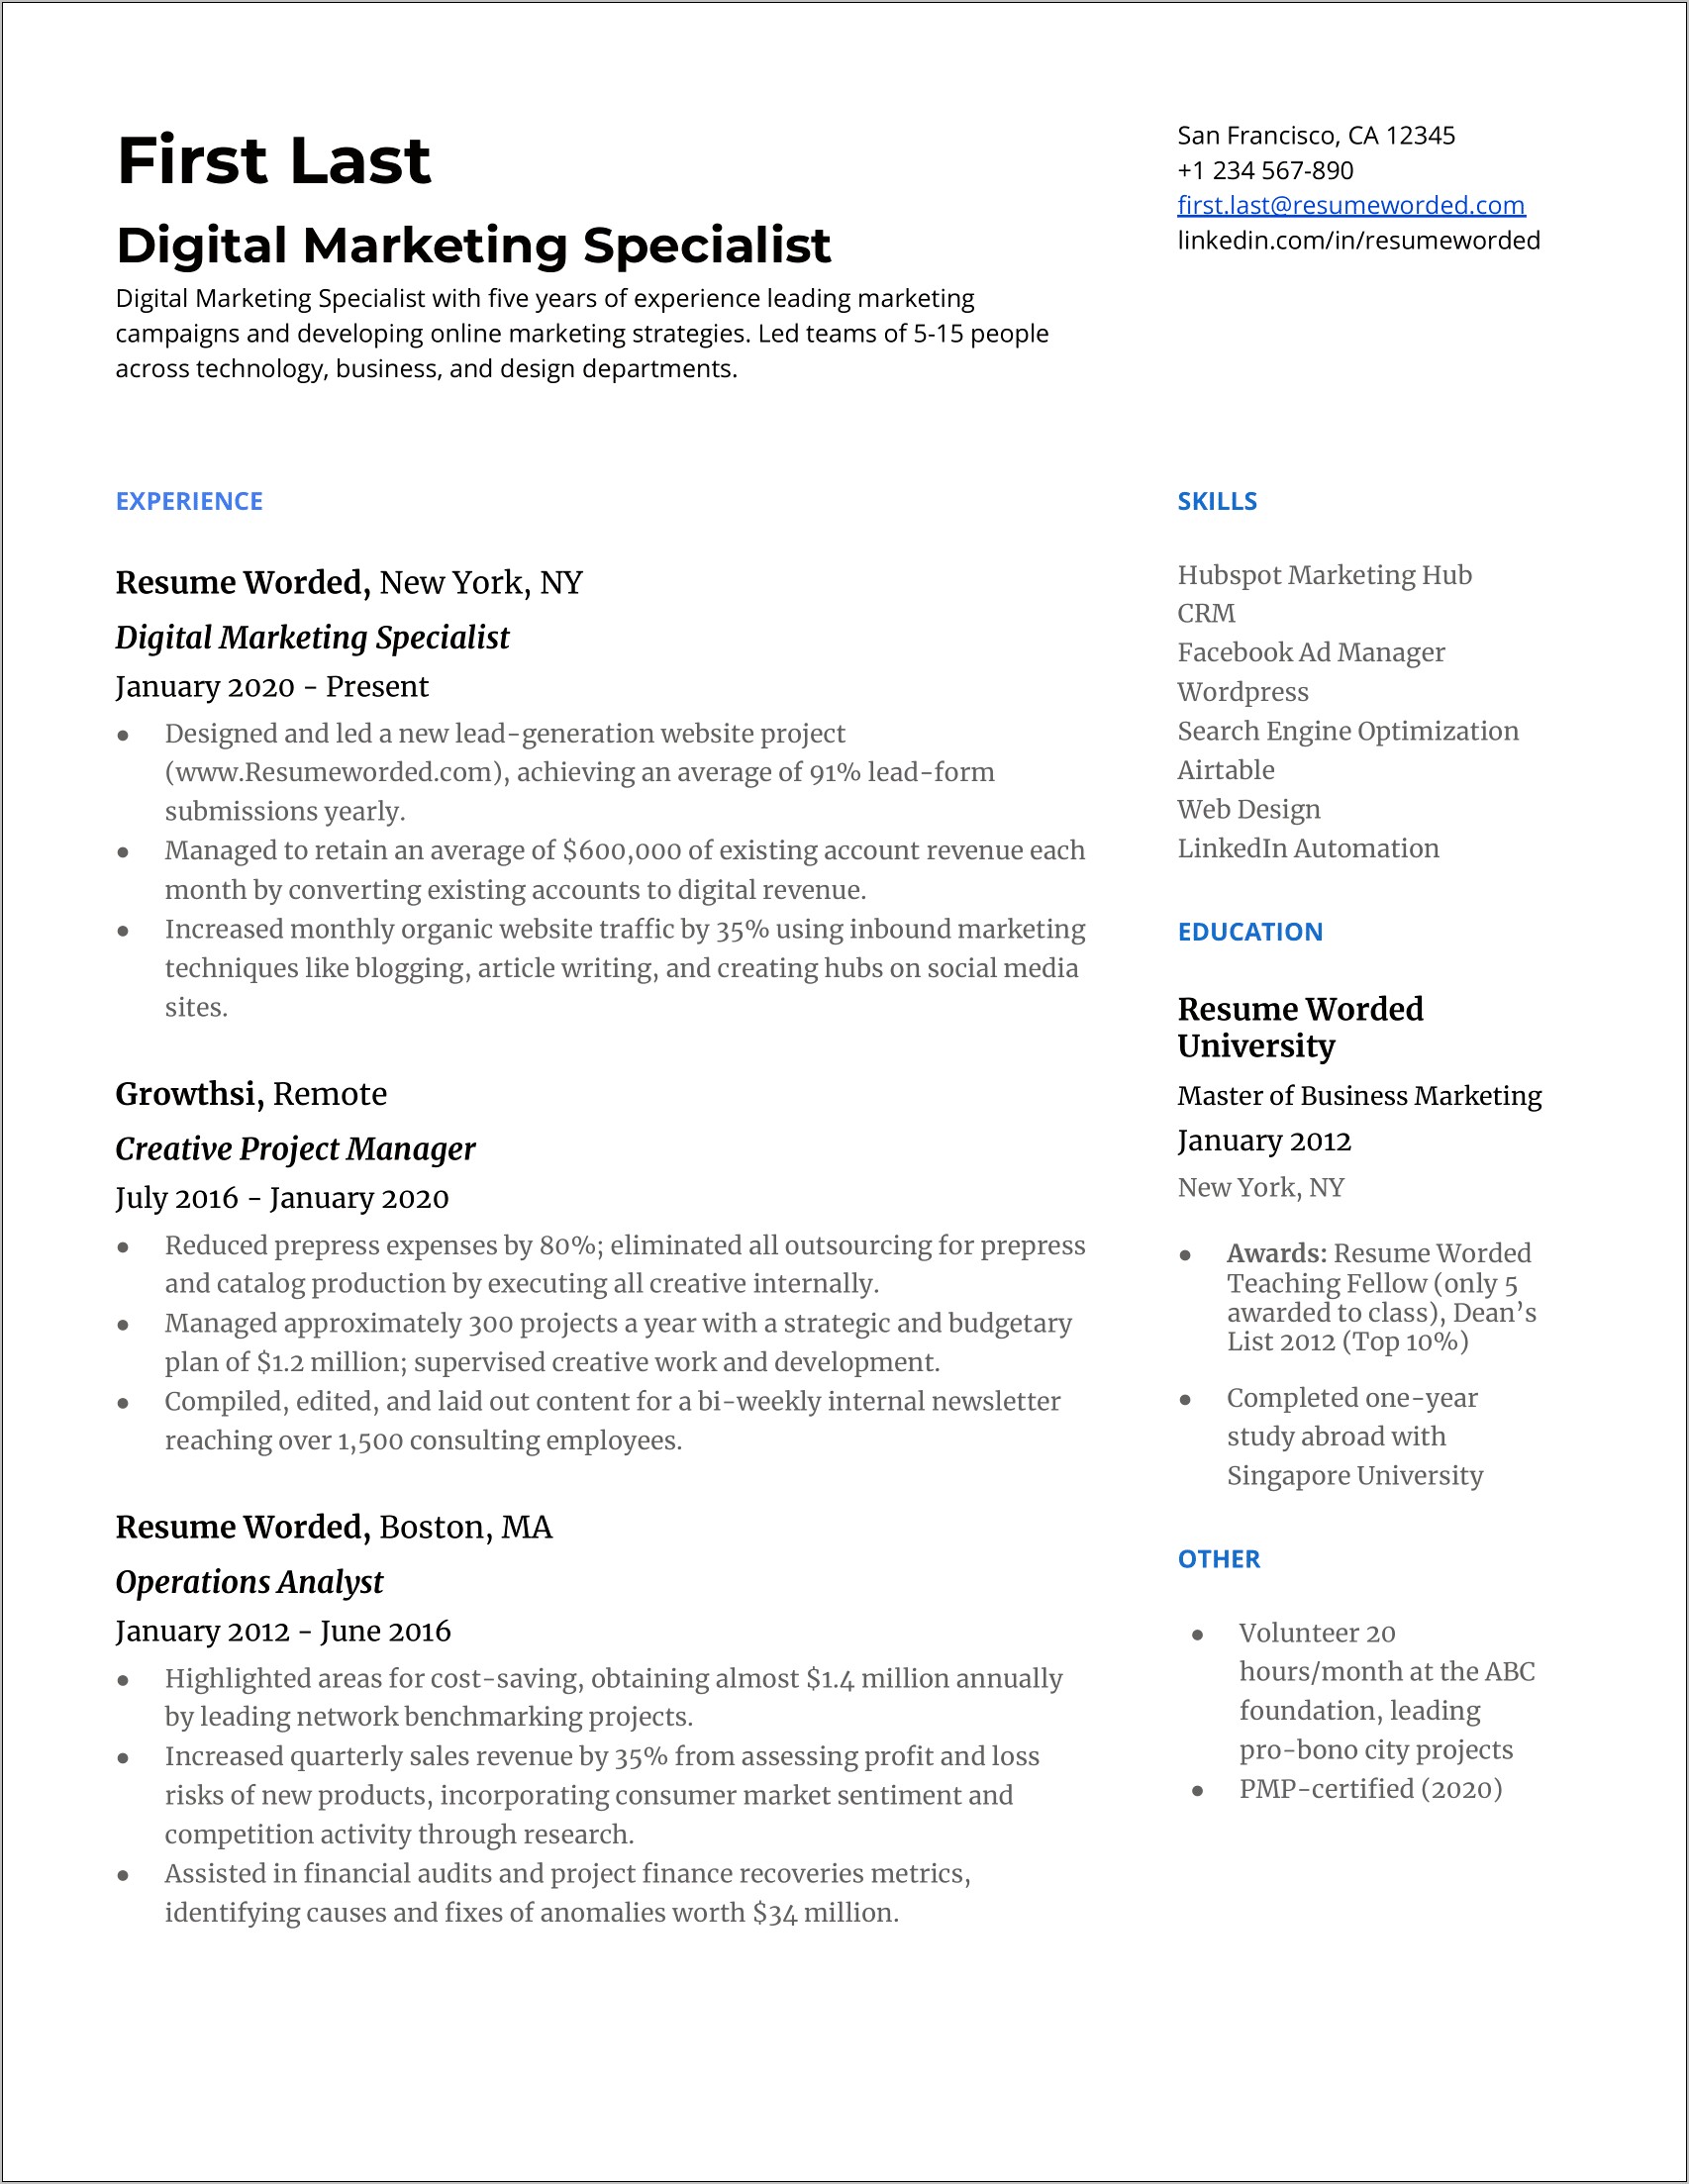 Resume Skills I Want To Develop